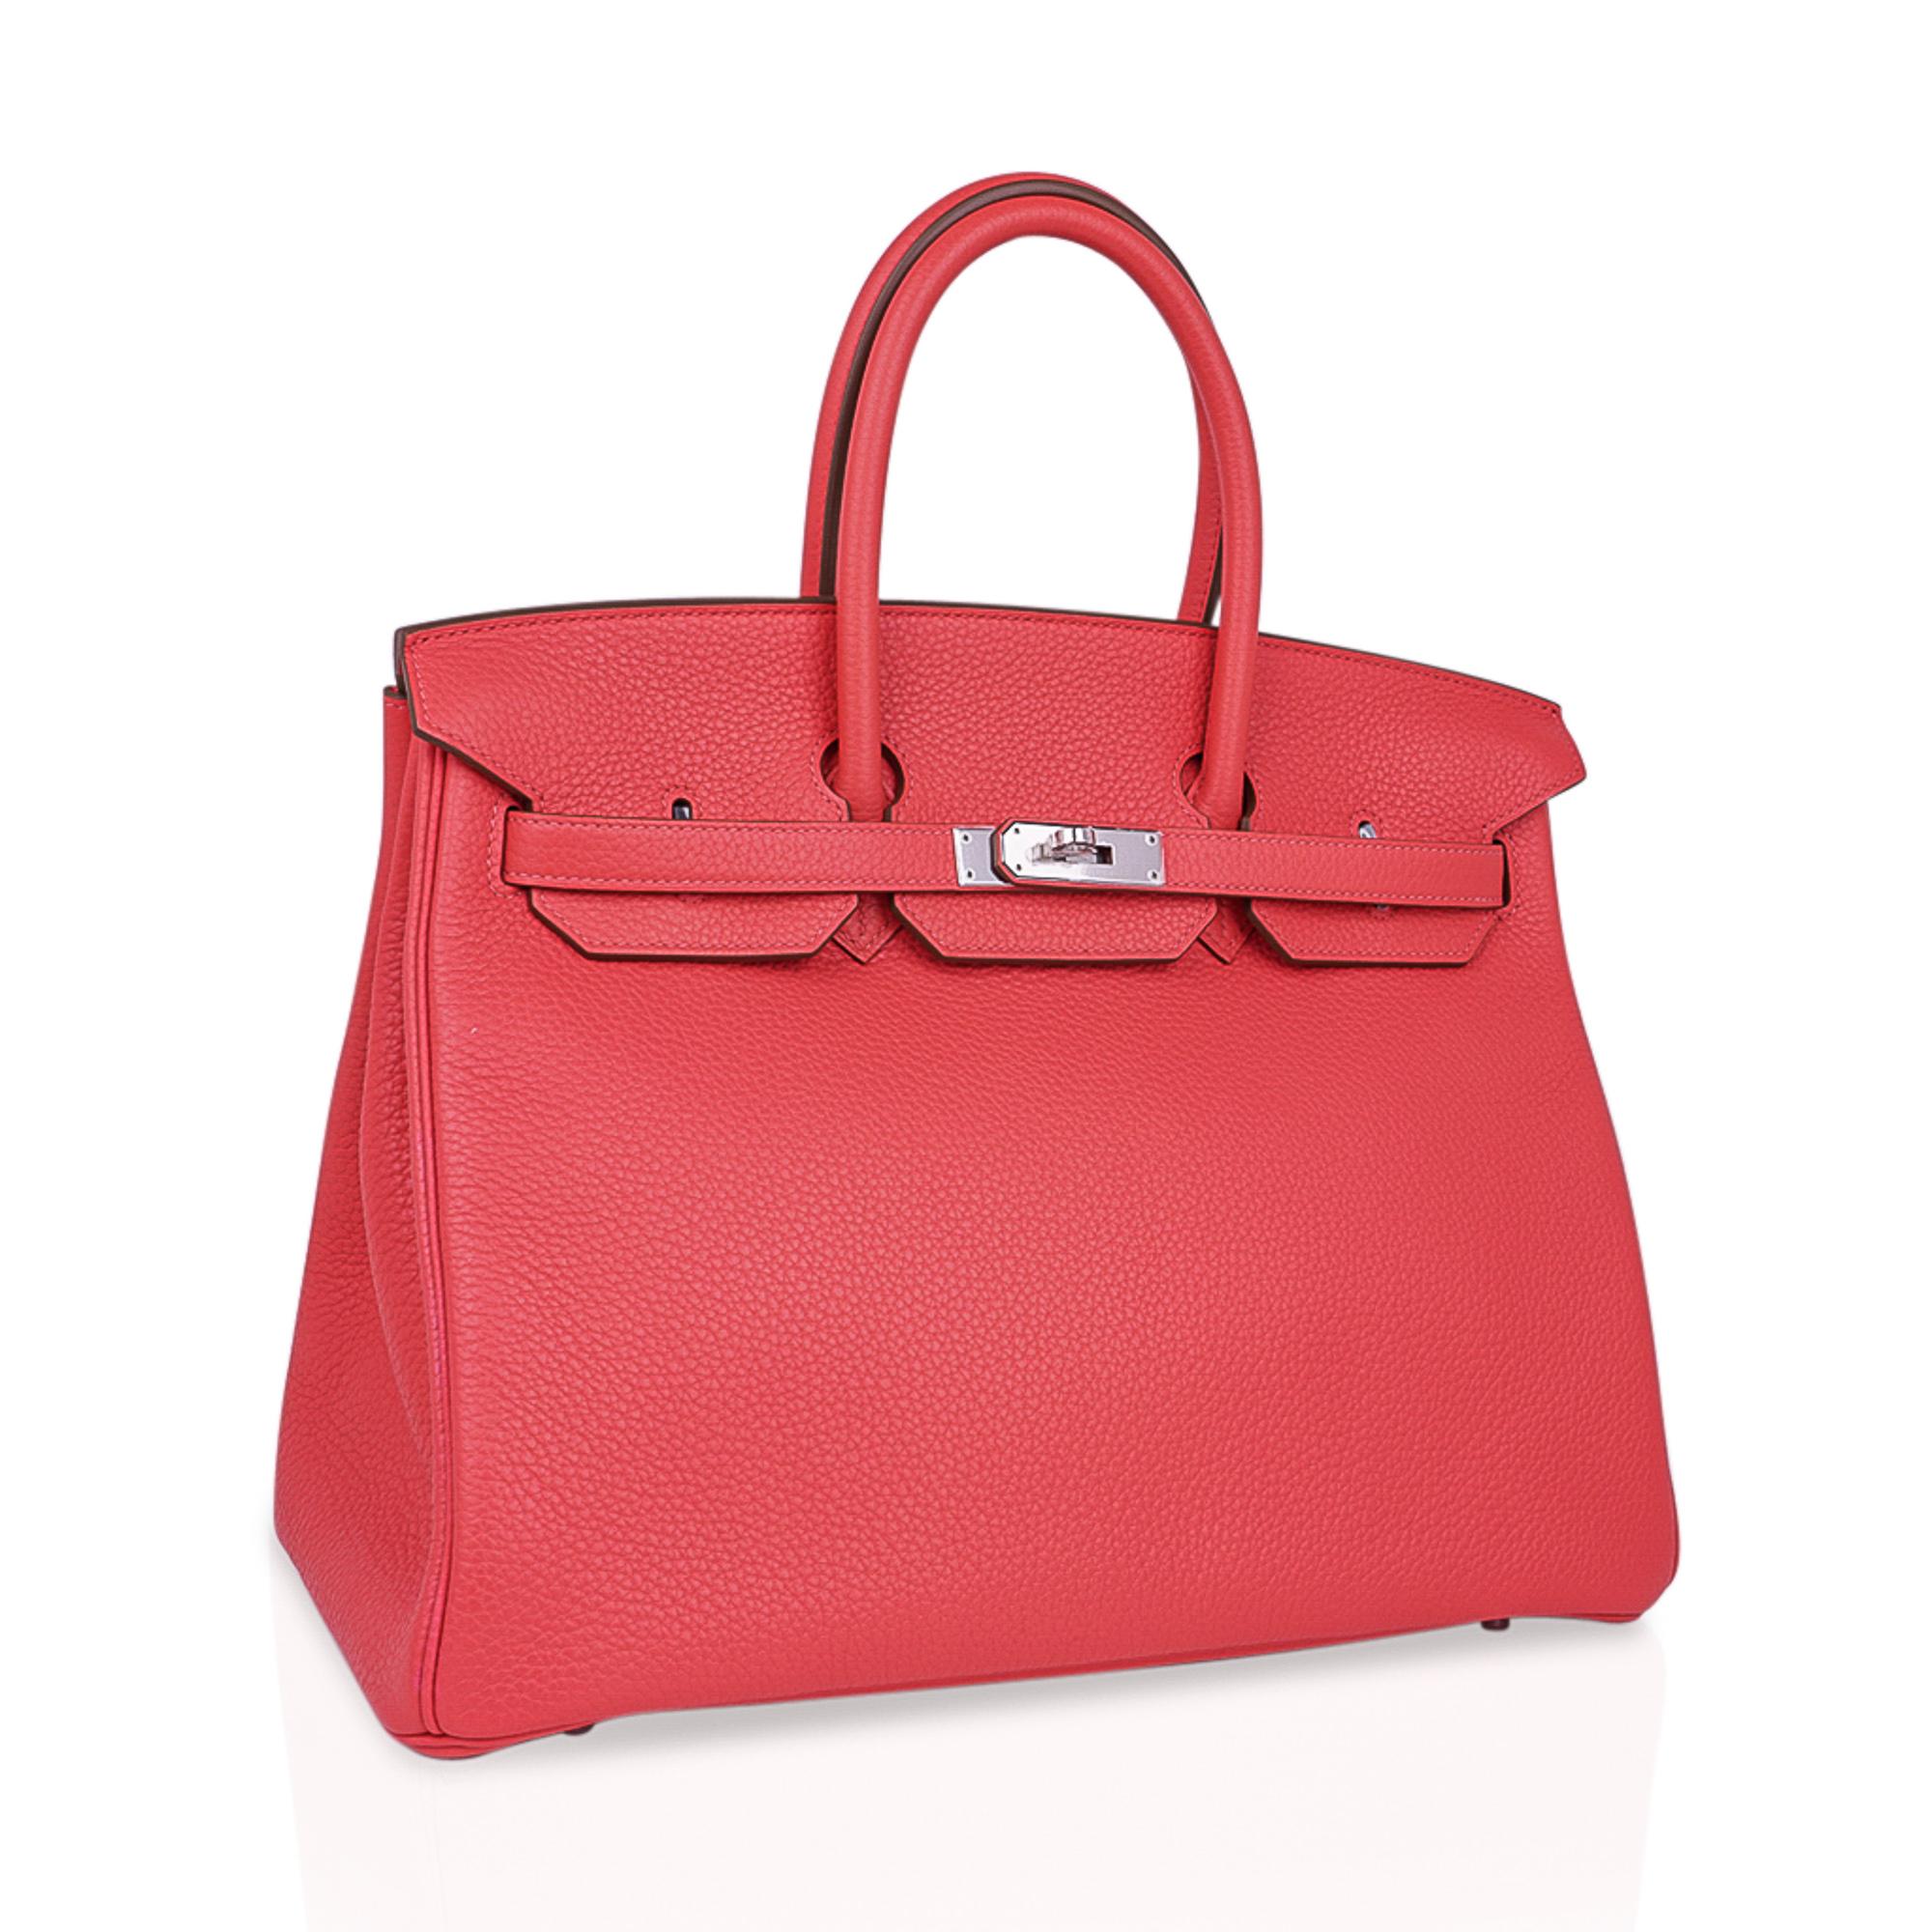 Mightychic offers an Hermes Birkin 35 Rose Jaipur is a divine, and very rare to find, pink that is neutral and perfect for year round wear.
Fresh with palladium.
Clemence leather is scratch resistant and butter soft. 
NEW or NEVER WORN.
Comes with